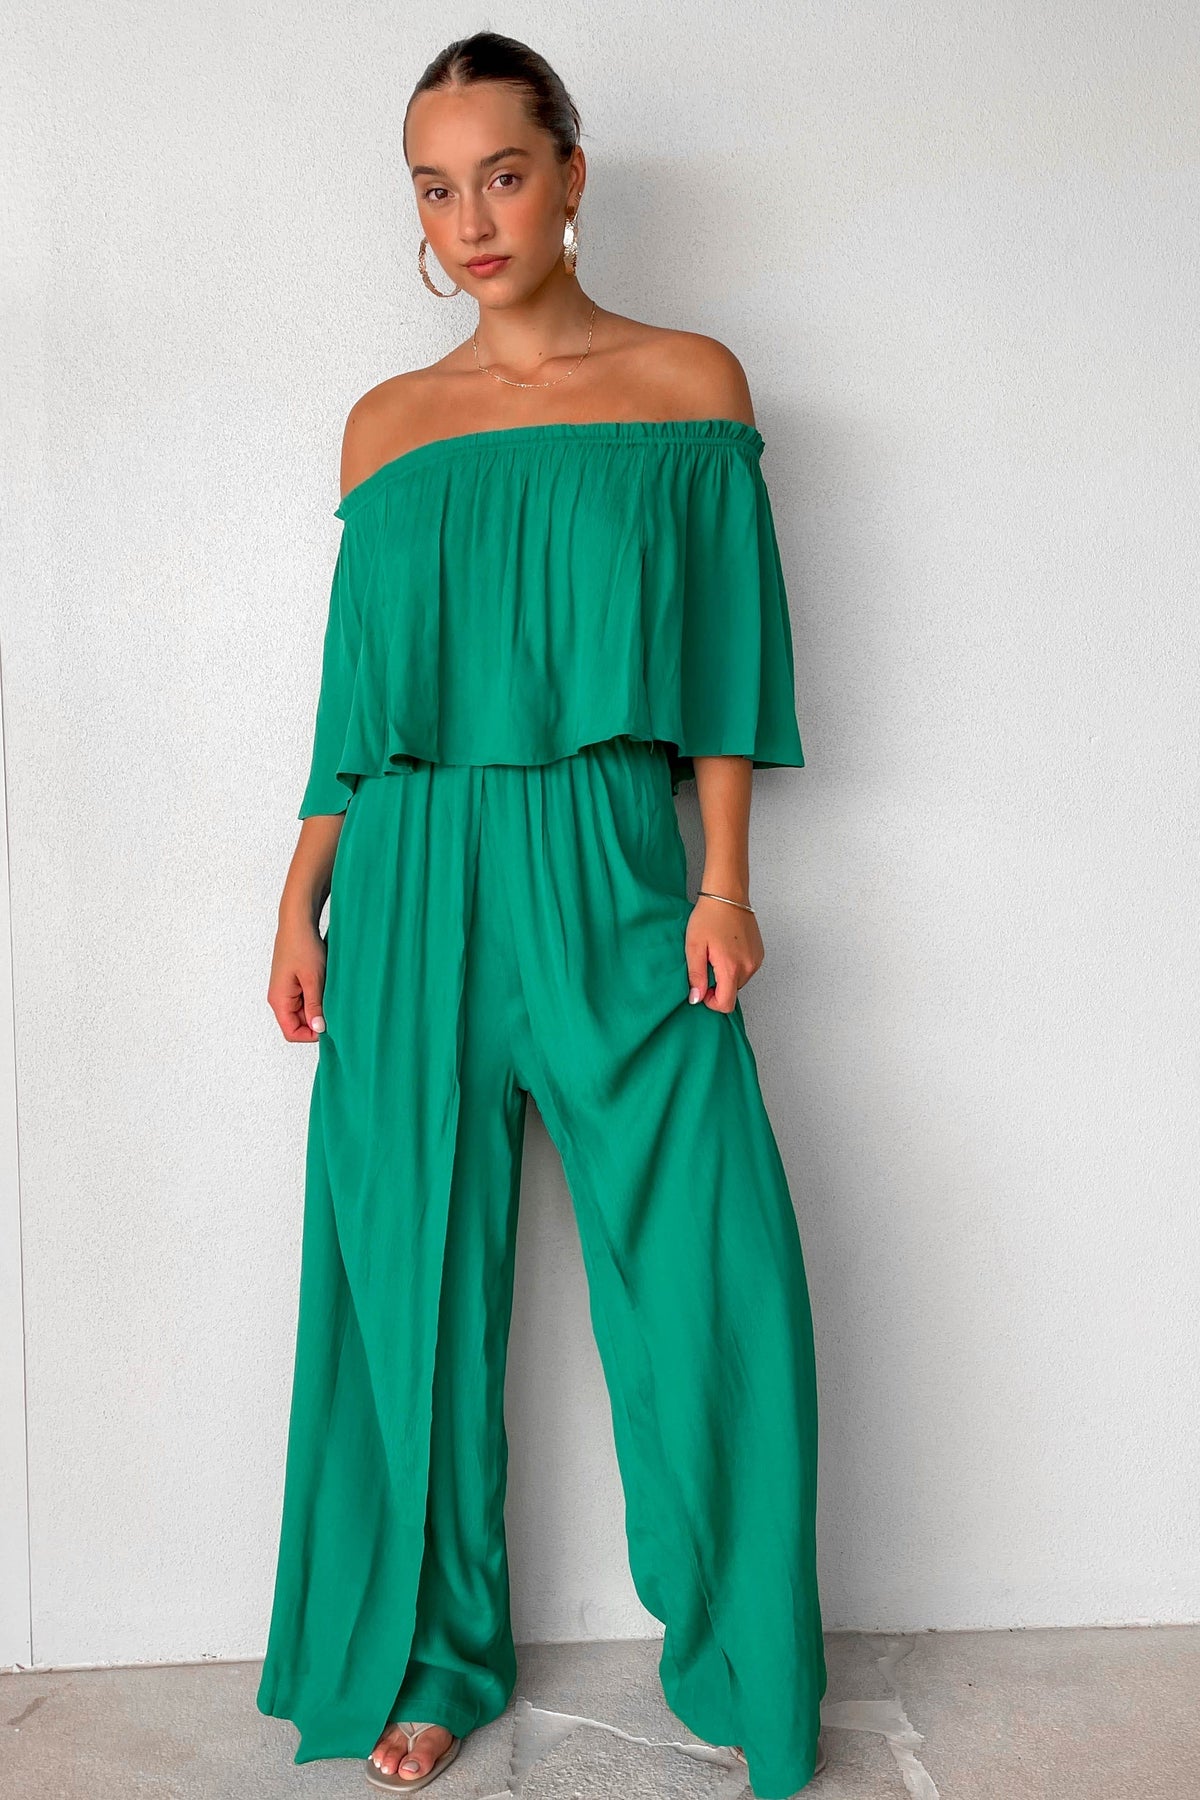 Trisset Jumpsuit, GREEN, JUMPSUIT, JUMPSUITS, new arrivals, NYLON &amp; RAYON, NYLON AND RAYON, OFF SHOULDER, RAYON AND NYLON, , -MISHKAH